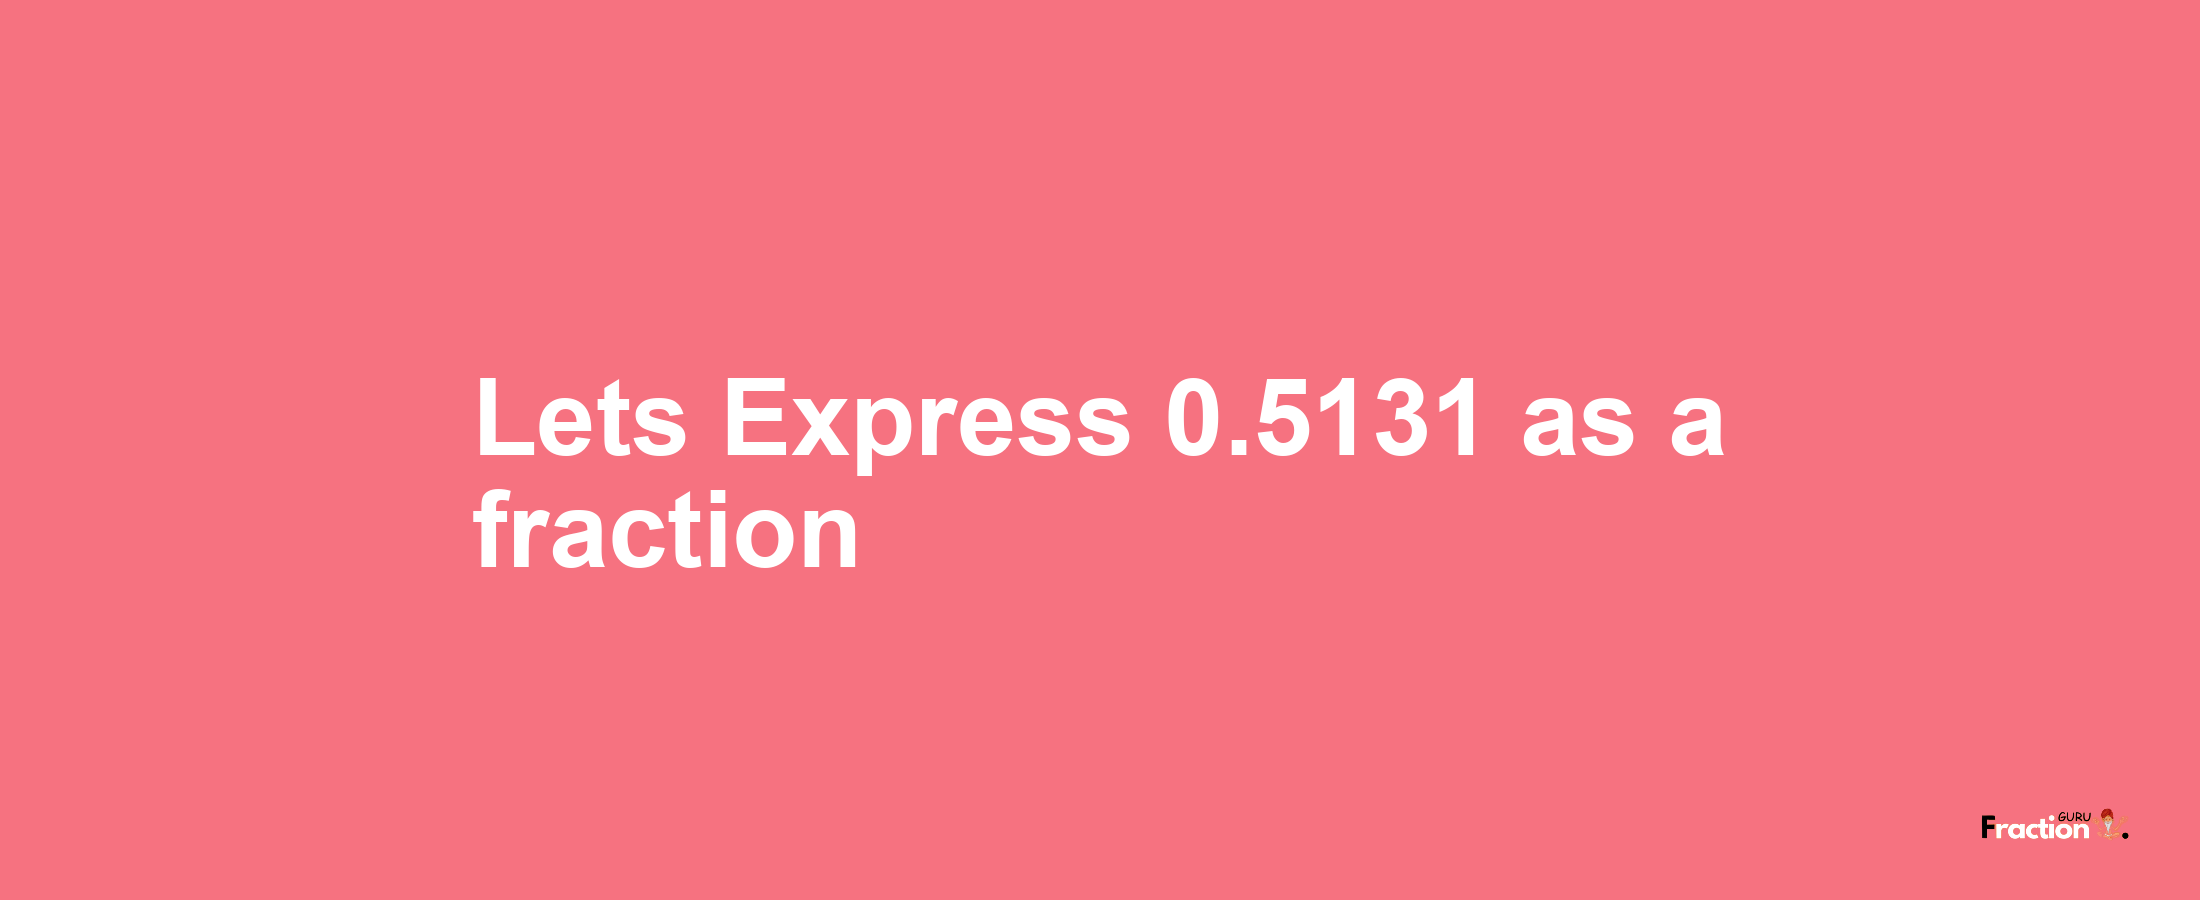 Lets Express 0.5131 as afraction